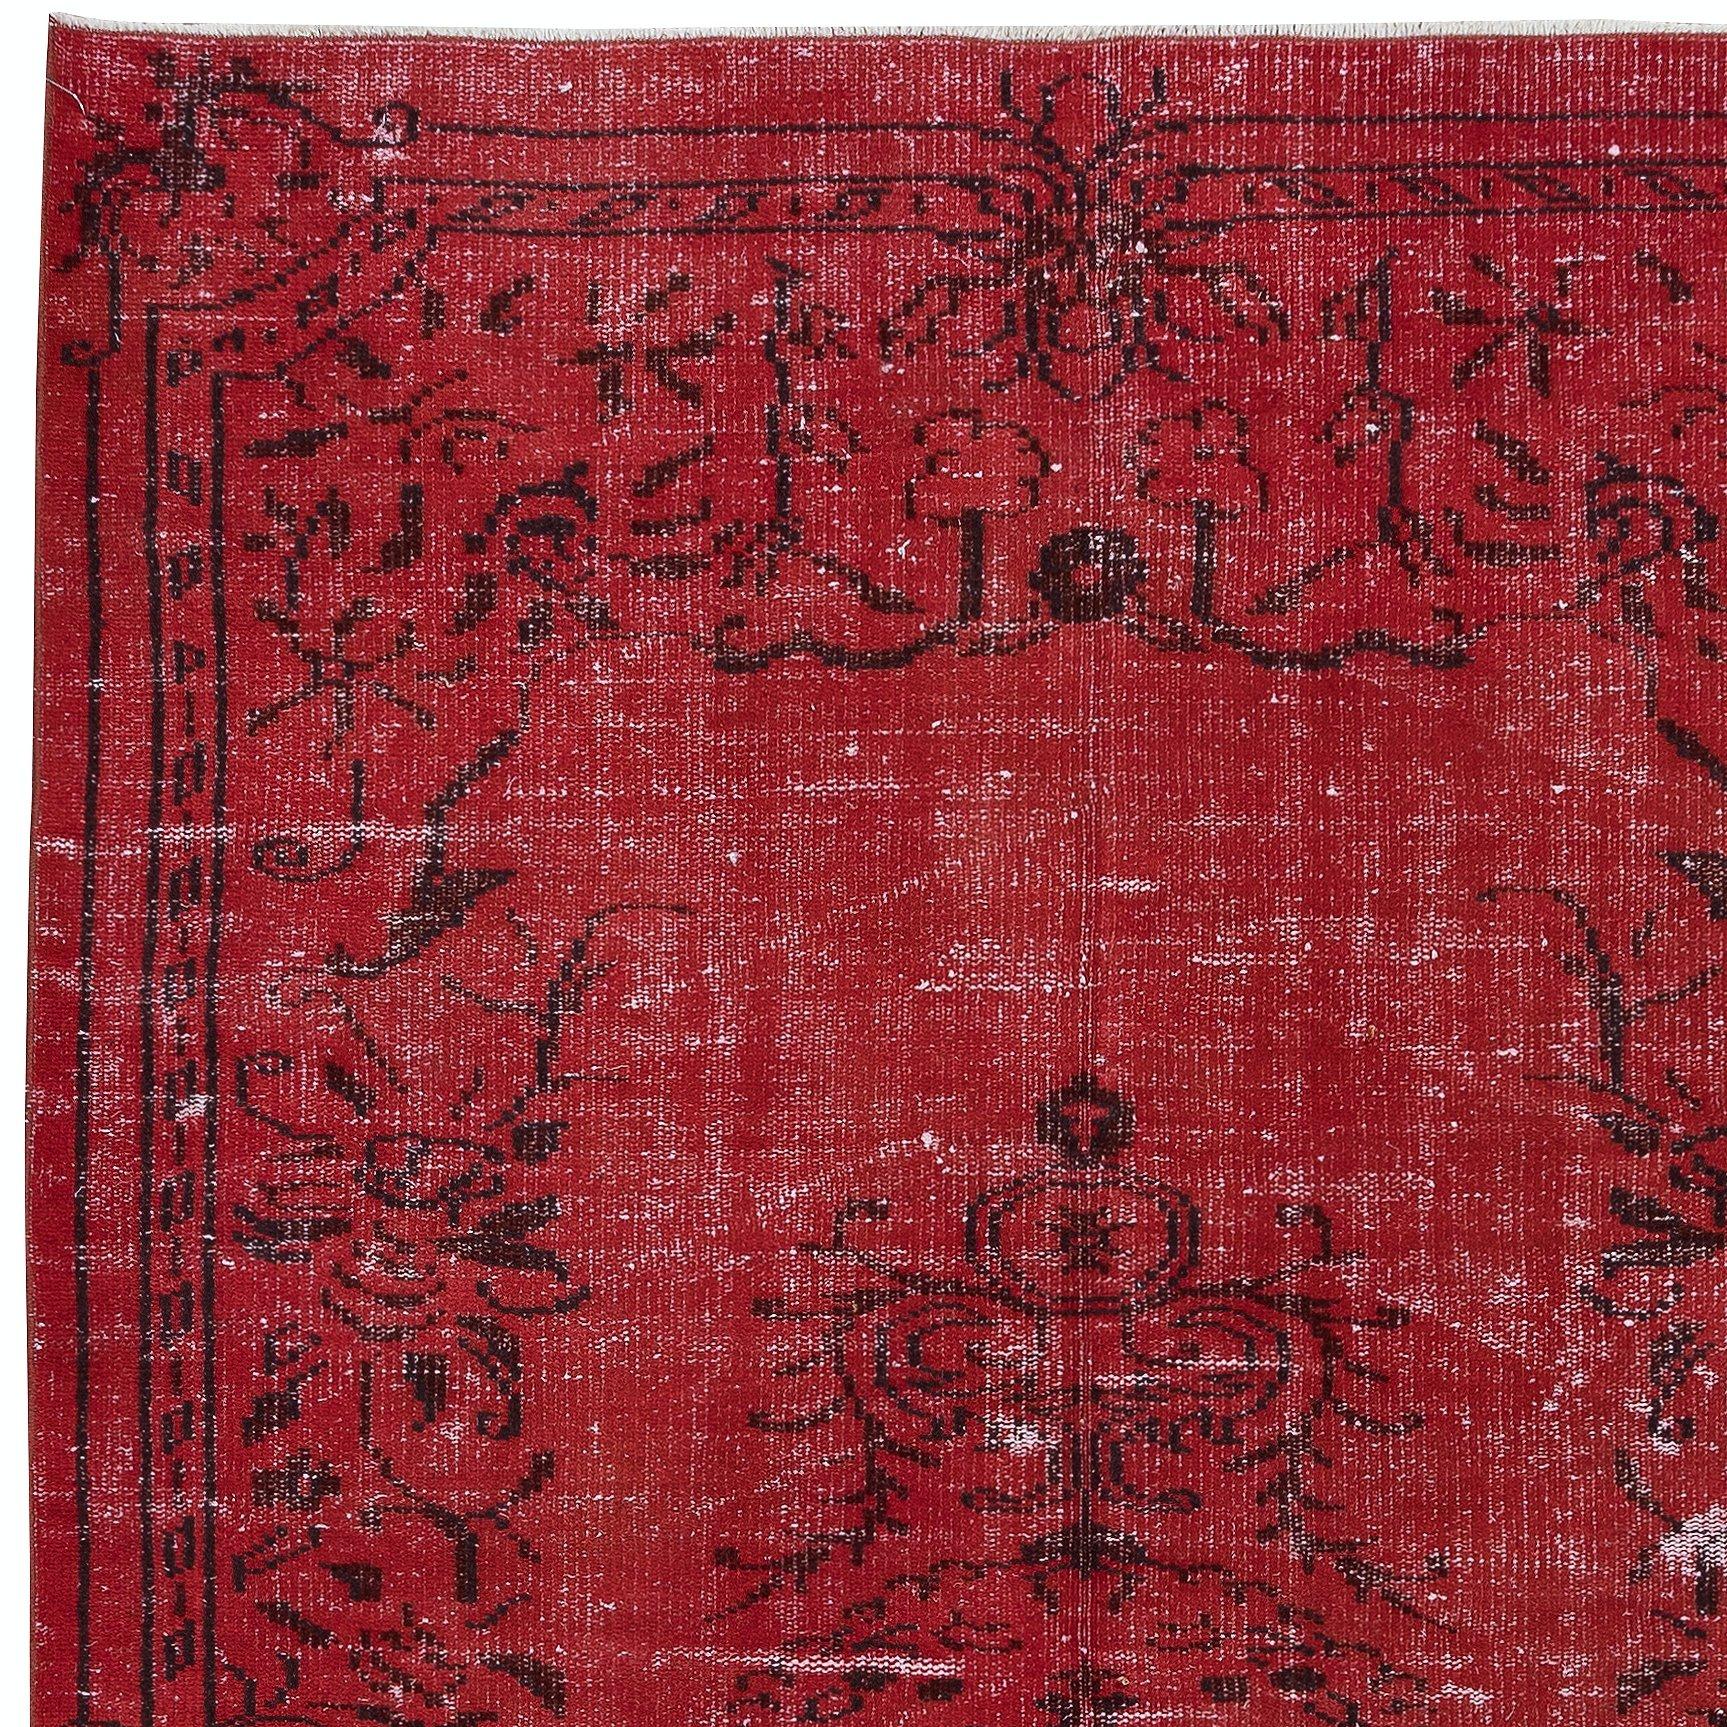 Turkish 5x8 Ft Contemporary Wool Area Rug in Burgundy Red, Hand-Knotted in Turkey For Sale